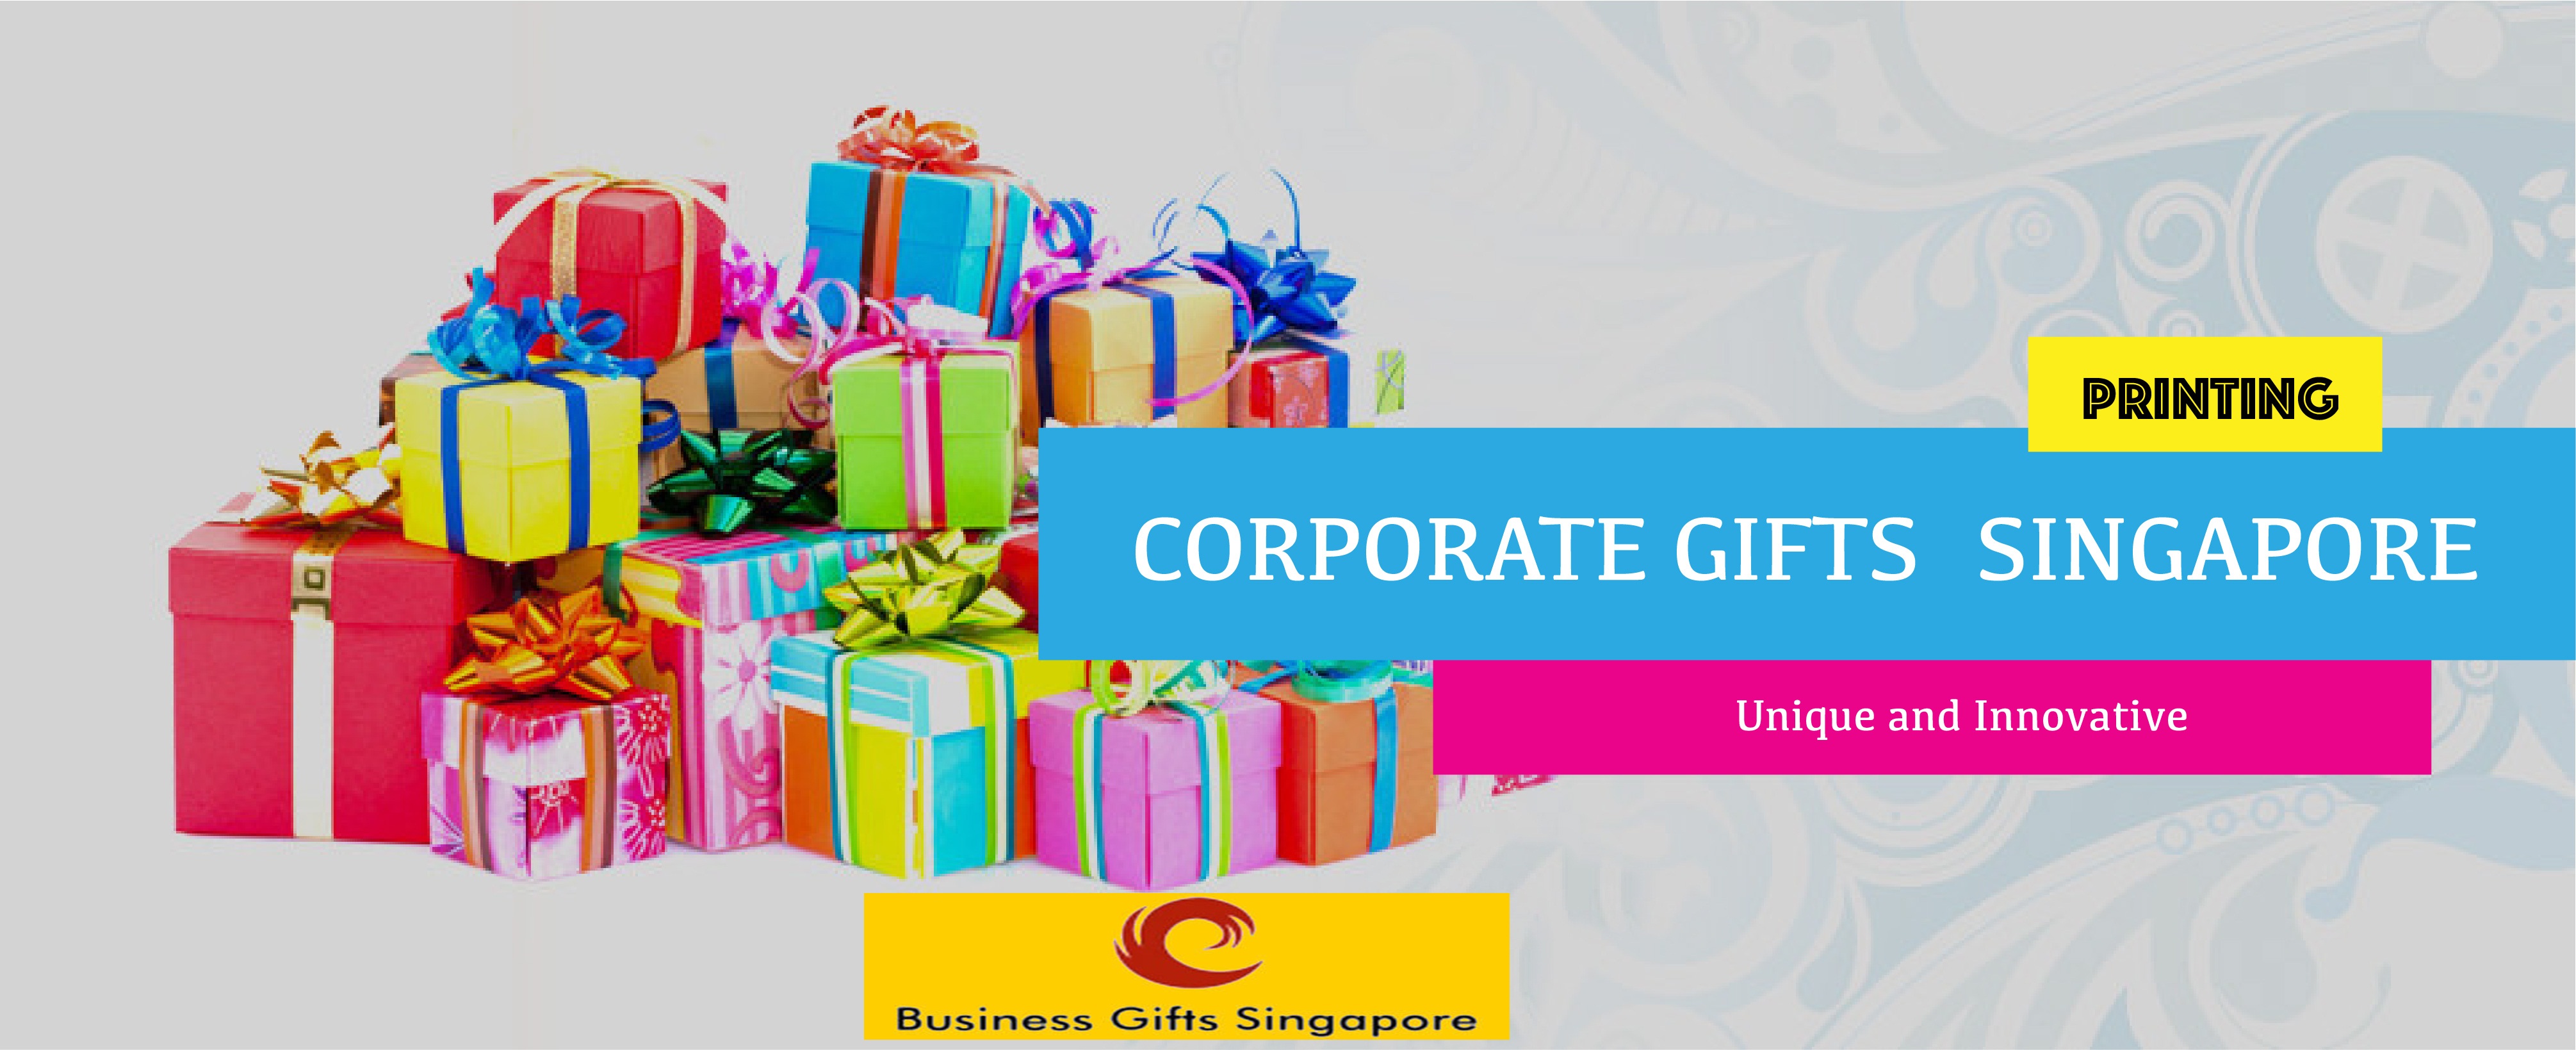 Business Gifts | Corporate Gifts Singapore | Customised Gifts Singapore | Door Gifts Ideas ...